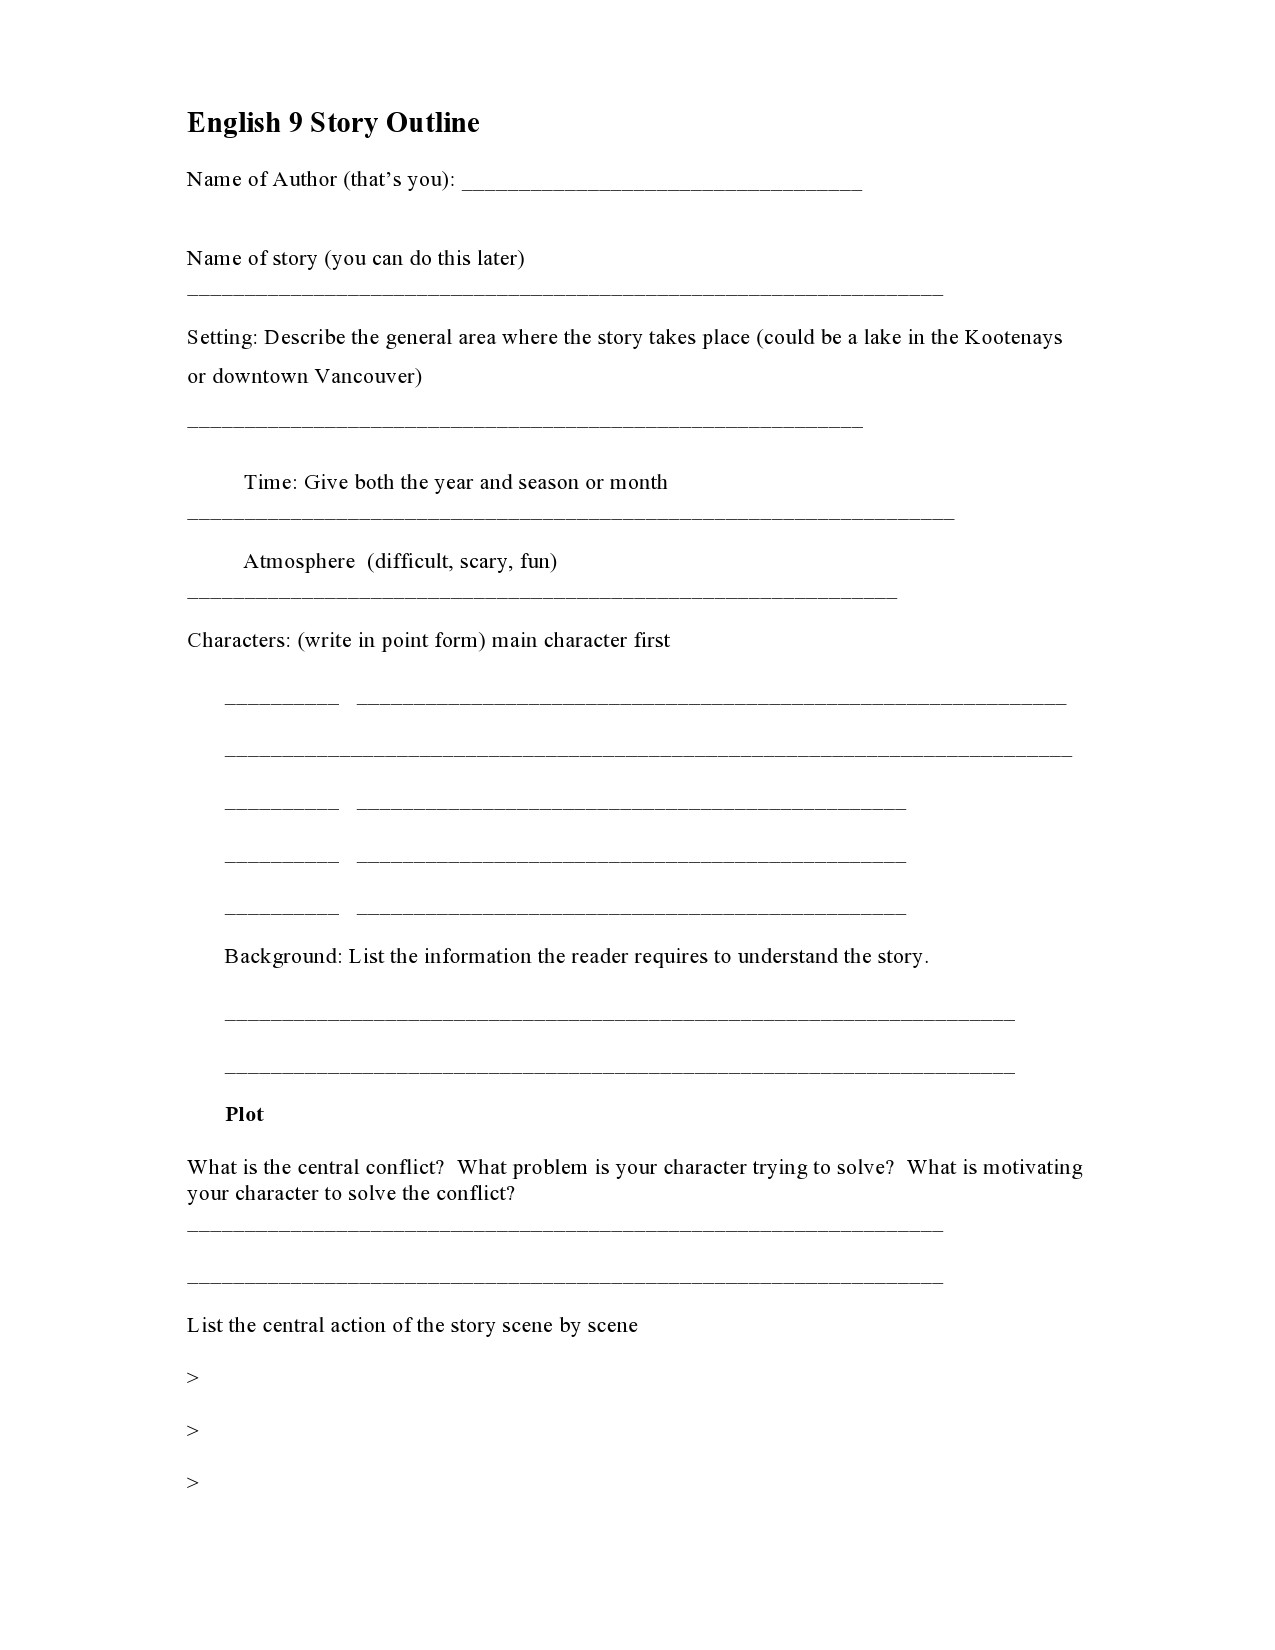 Free story outline template 04